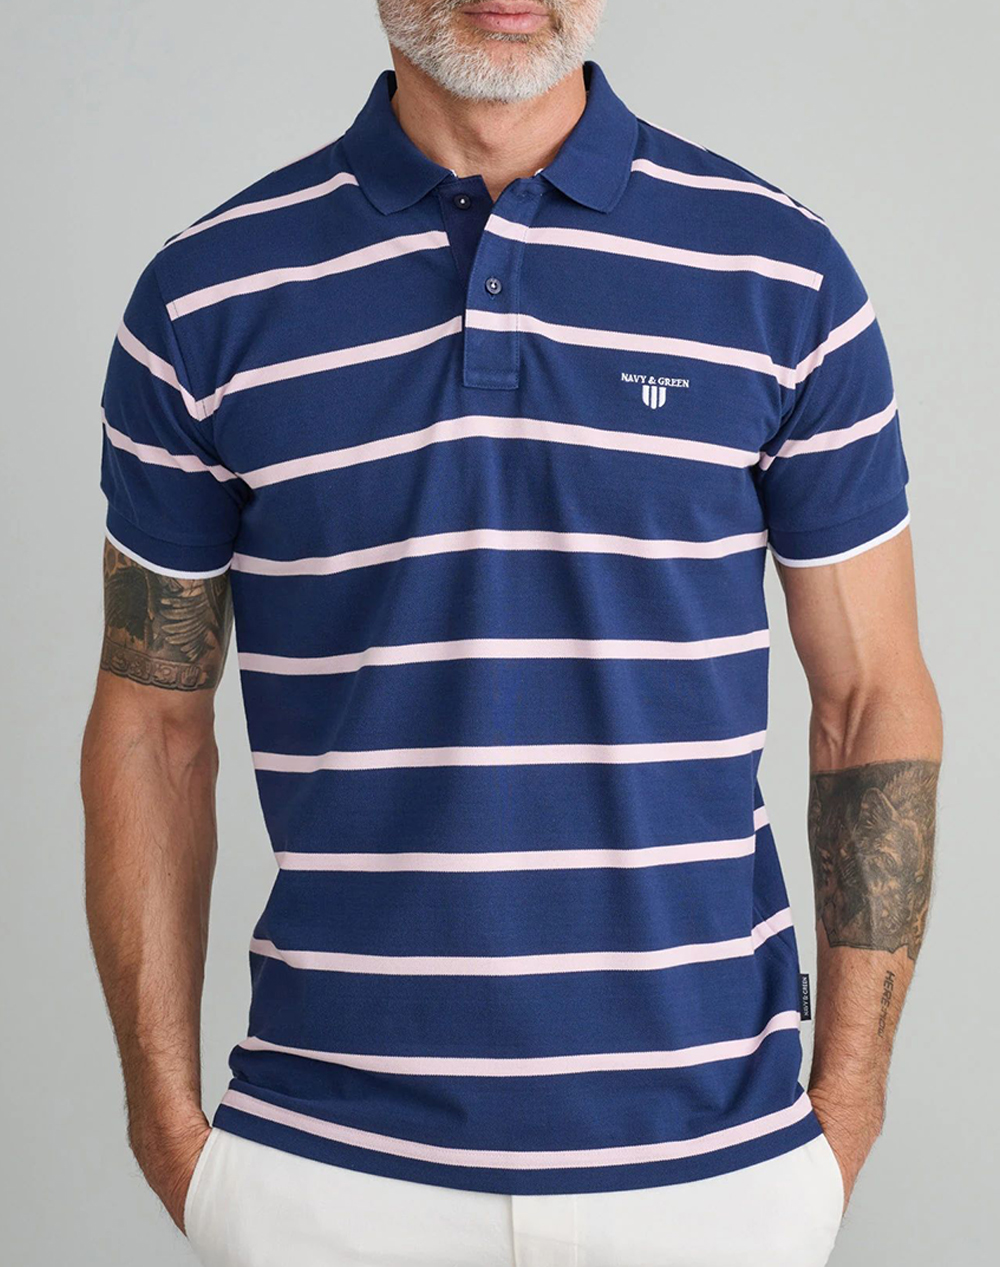 NAVY&GREEN POLO ΜΠΛΟΥΖΑΚΙ-CUSTOM FIT 24GE.884.2-NT BLUE/PINK NavyBlue